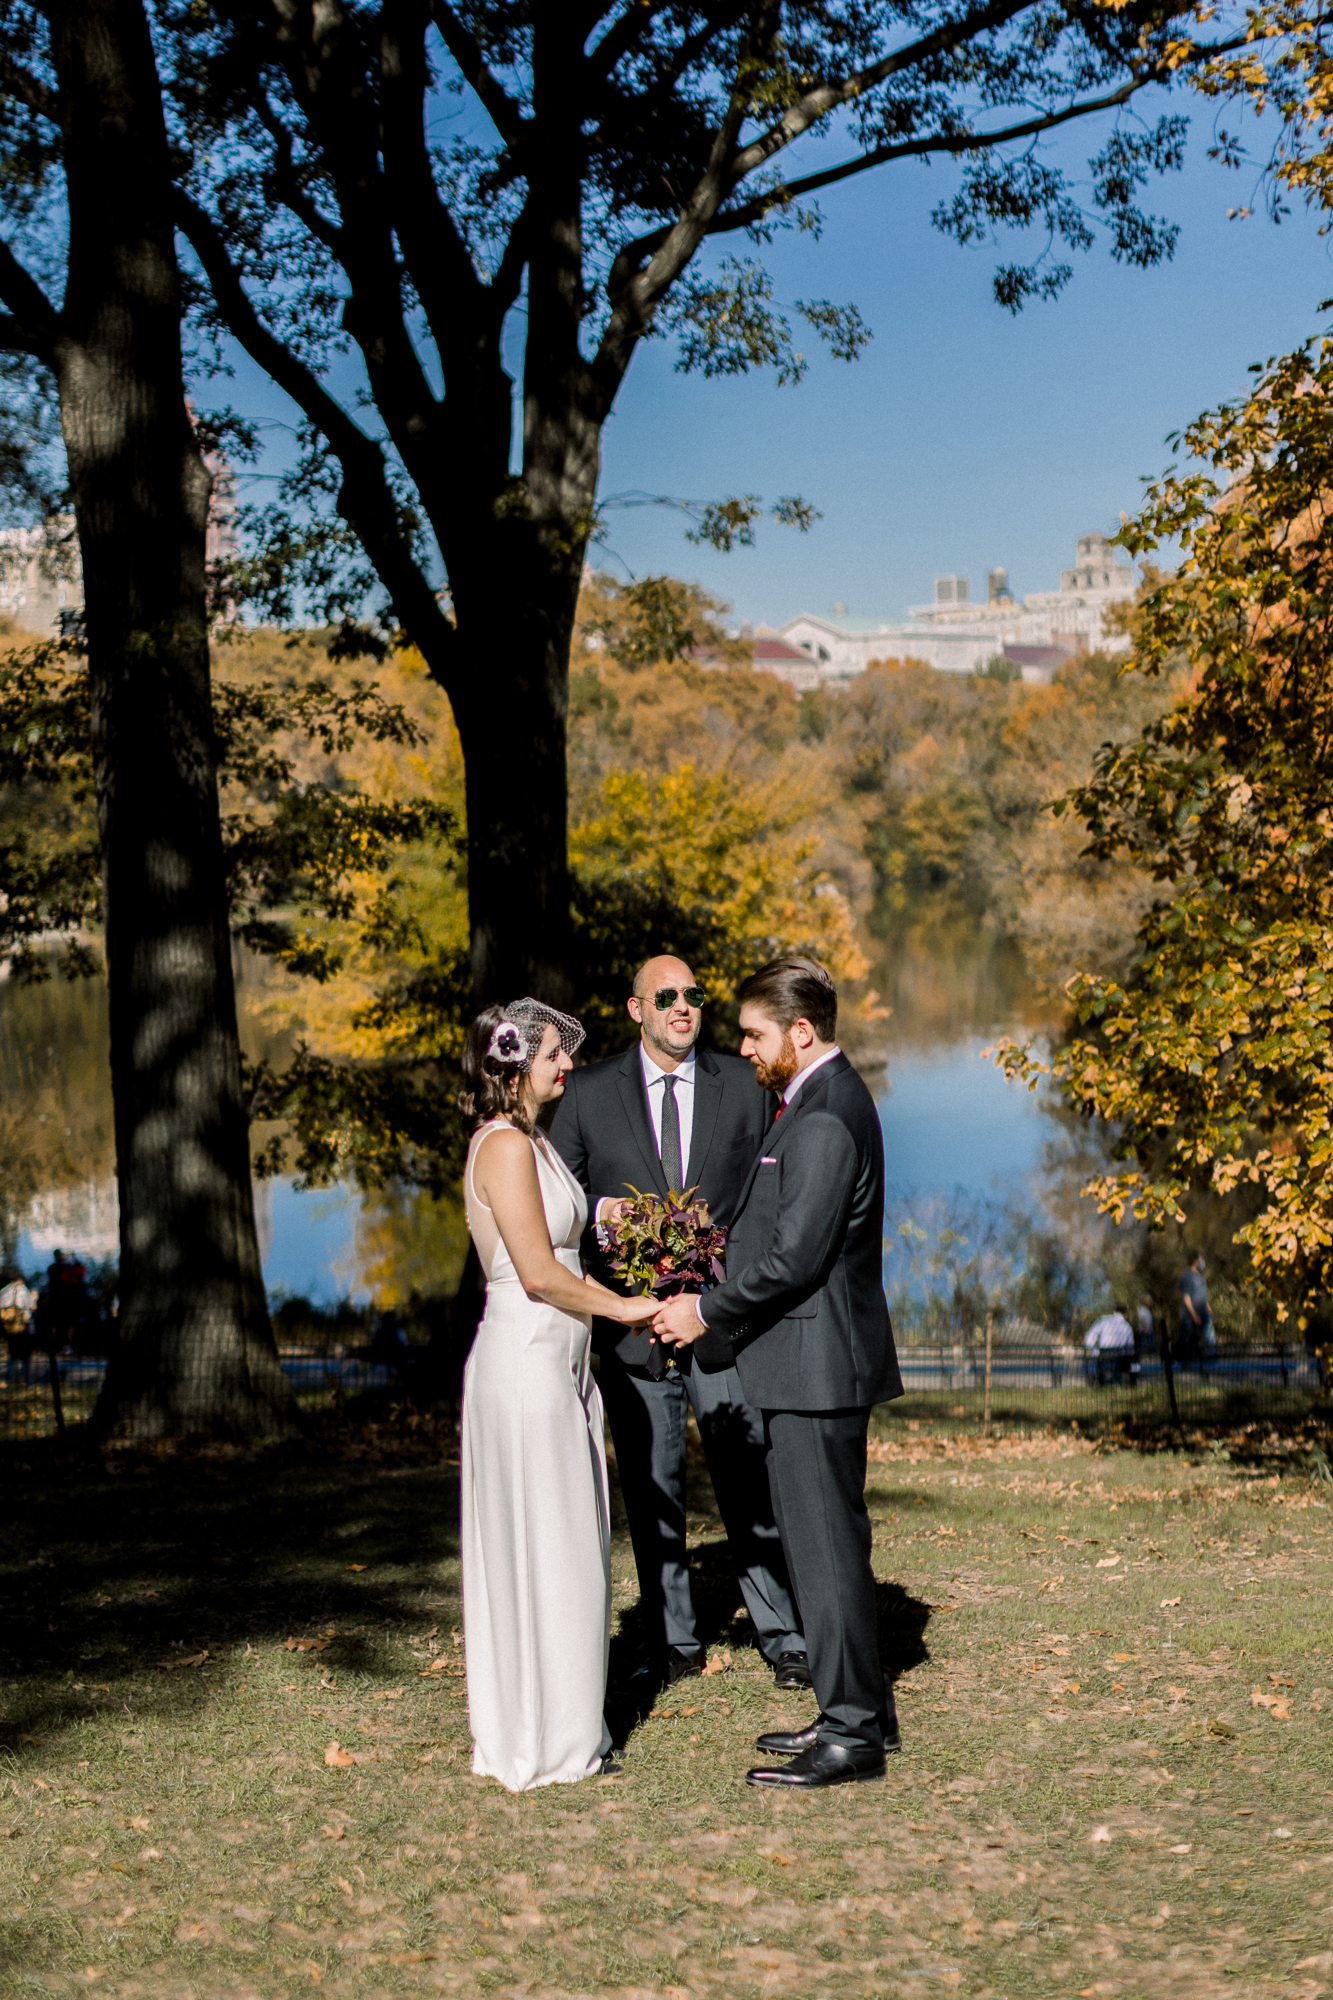 Best Restaurants to Eat at After a Beautiful Central Park Elopement